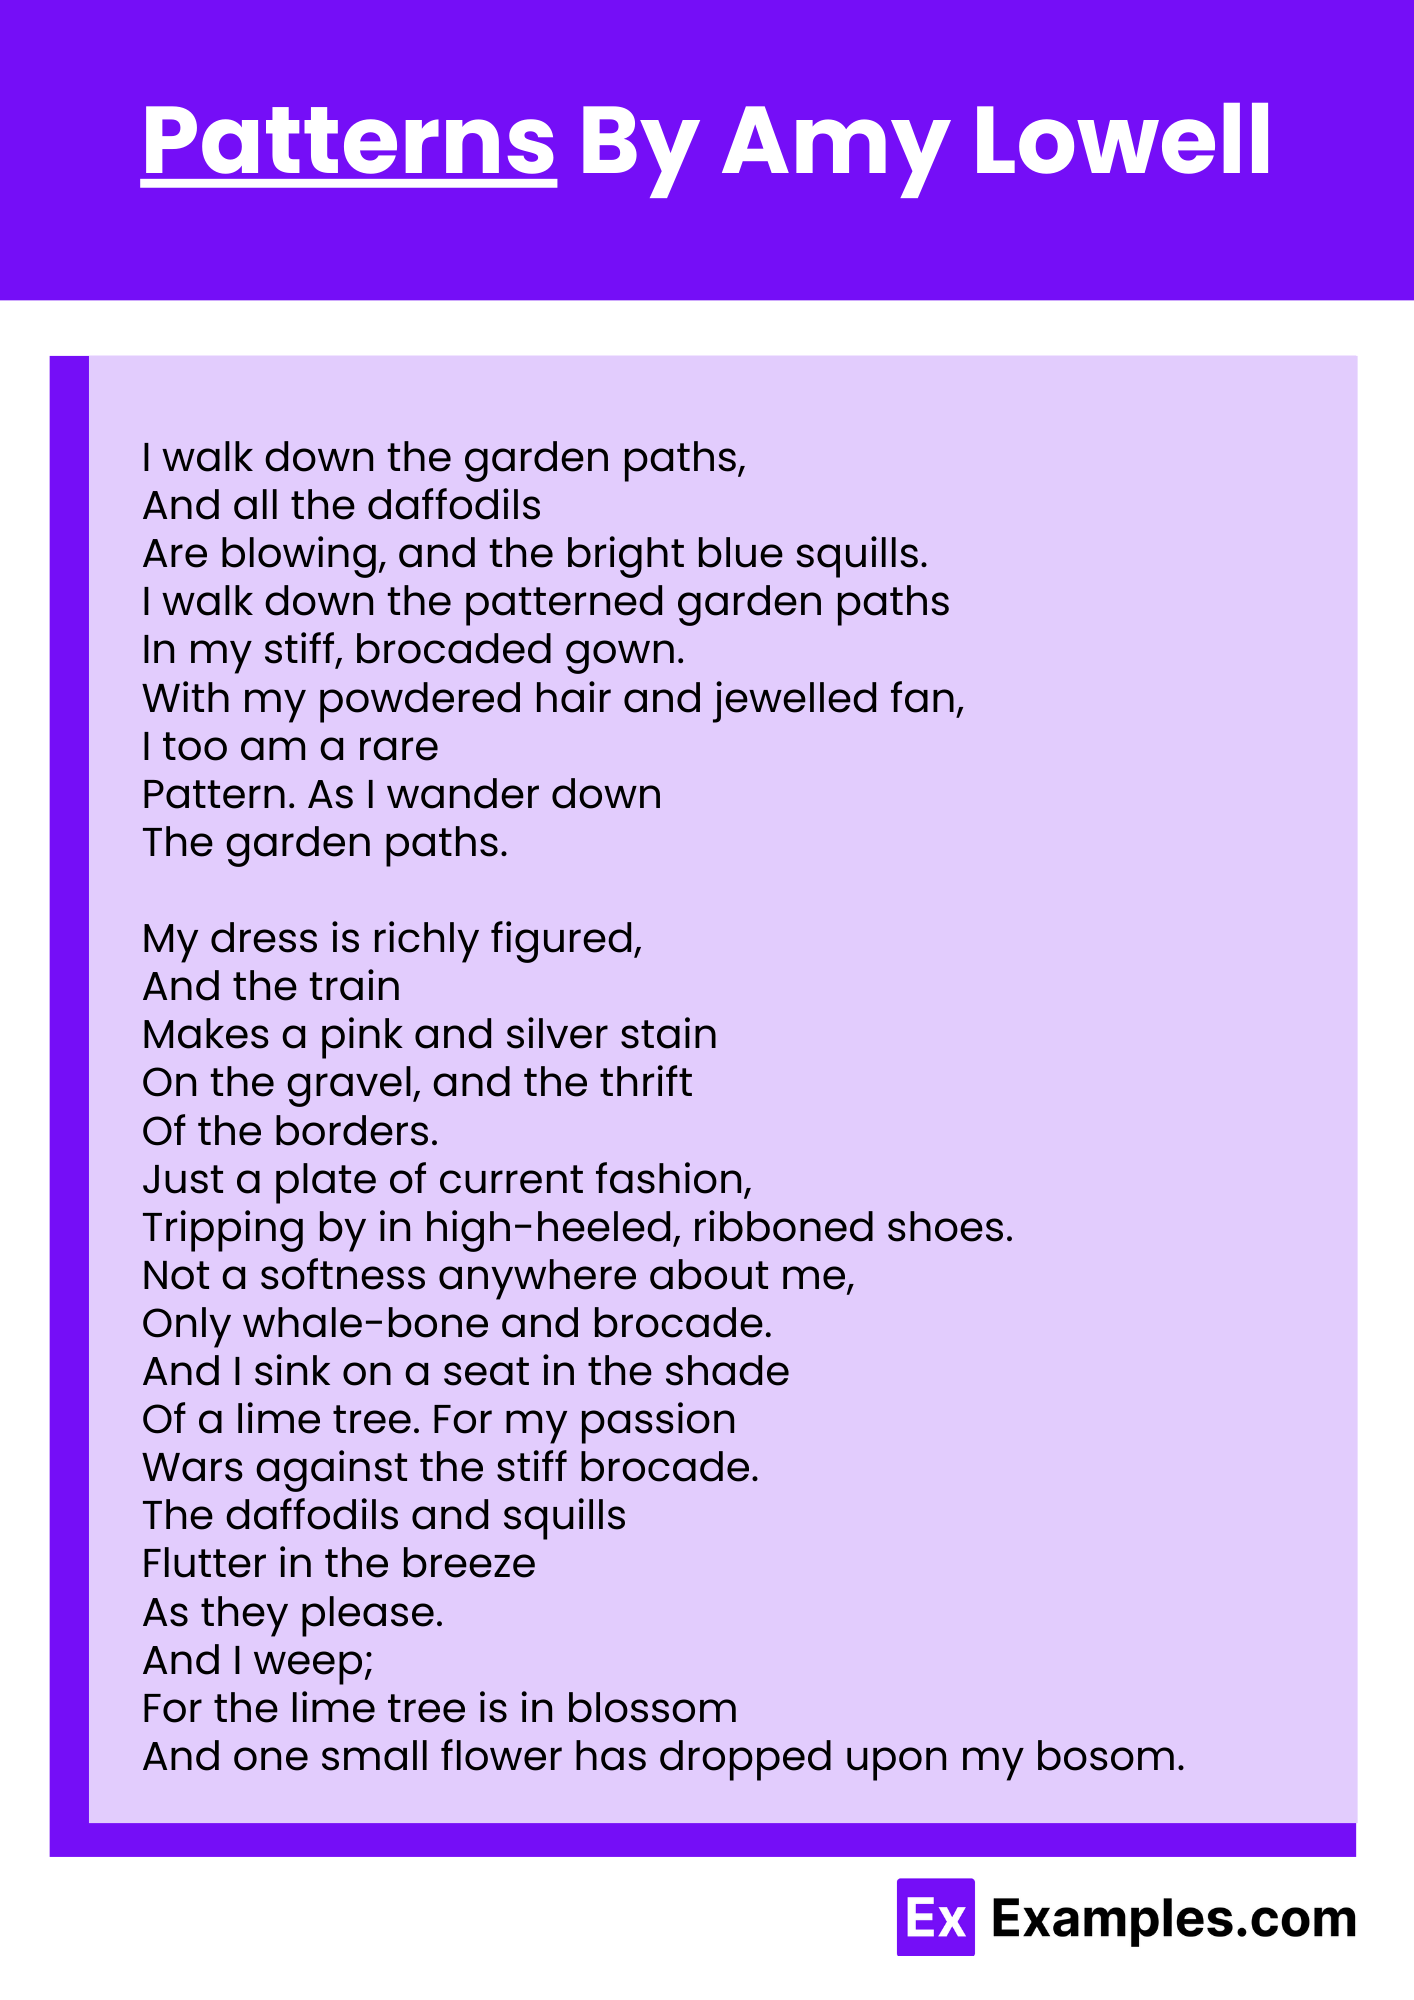 Patterns By Amy Lowell